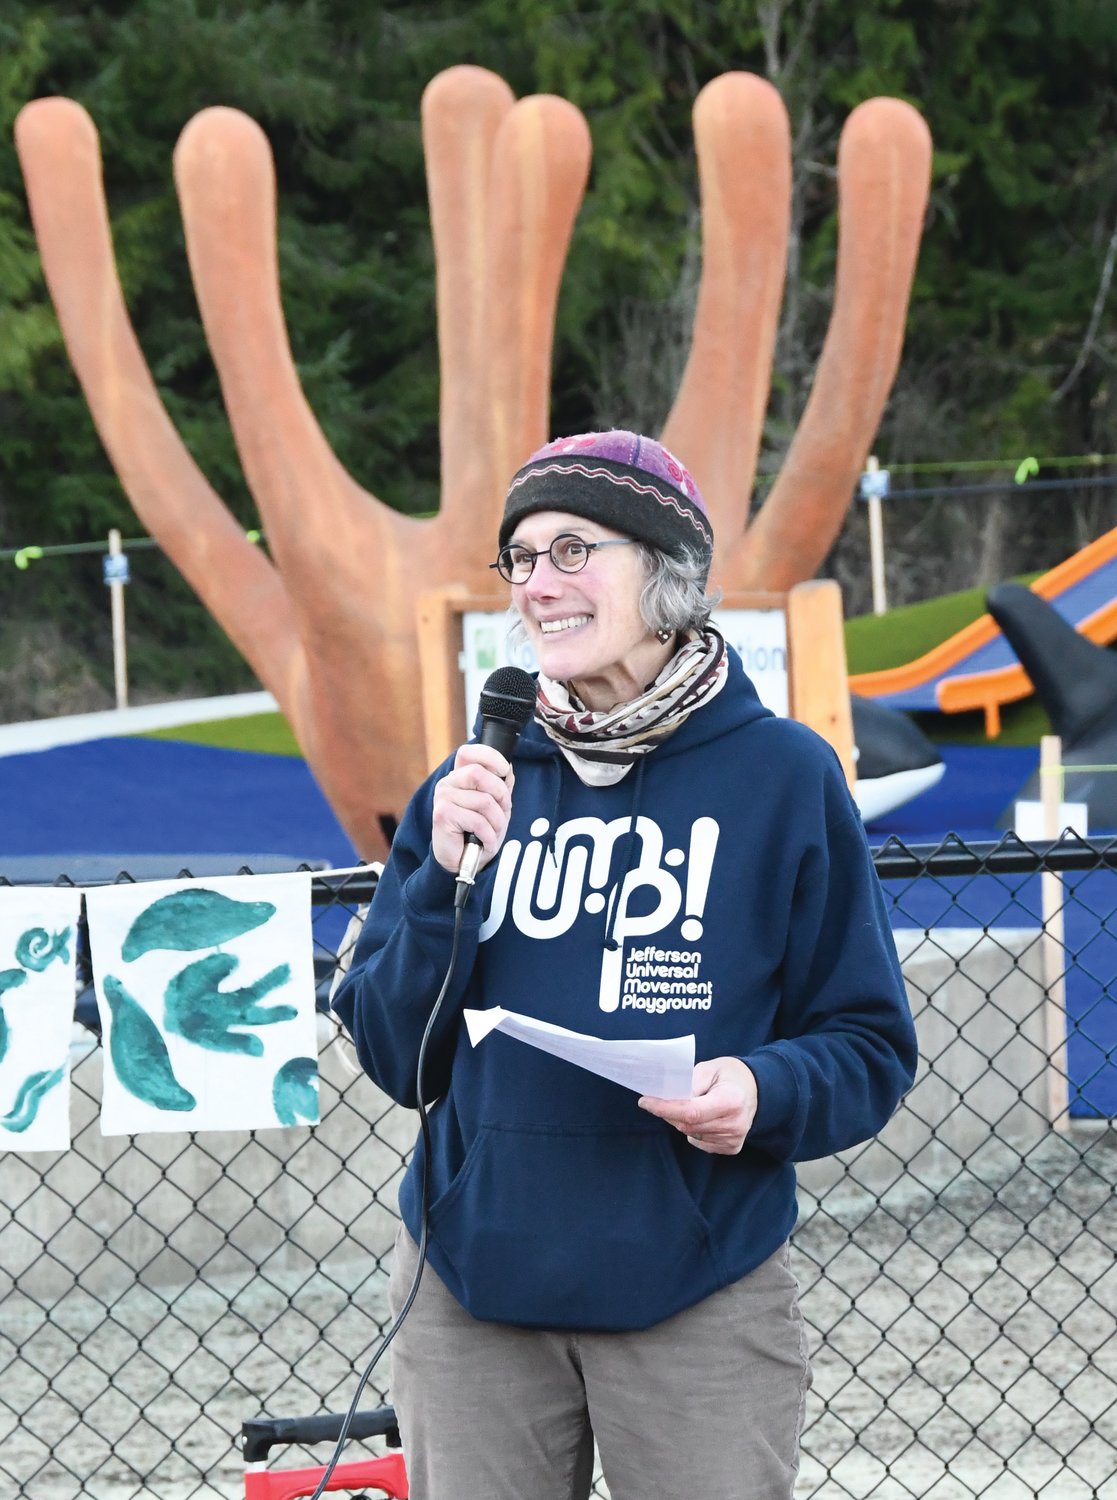 Sarah Grossman, the president of JUMP! lauds the community for aiding her and other volunteers in turning the play space from an idea into reality.